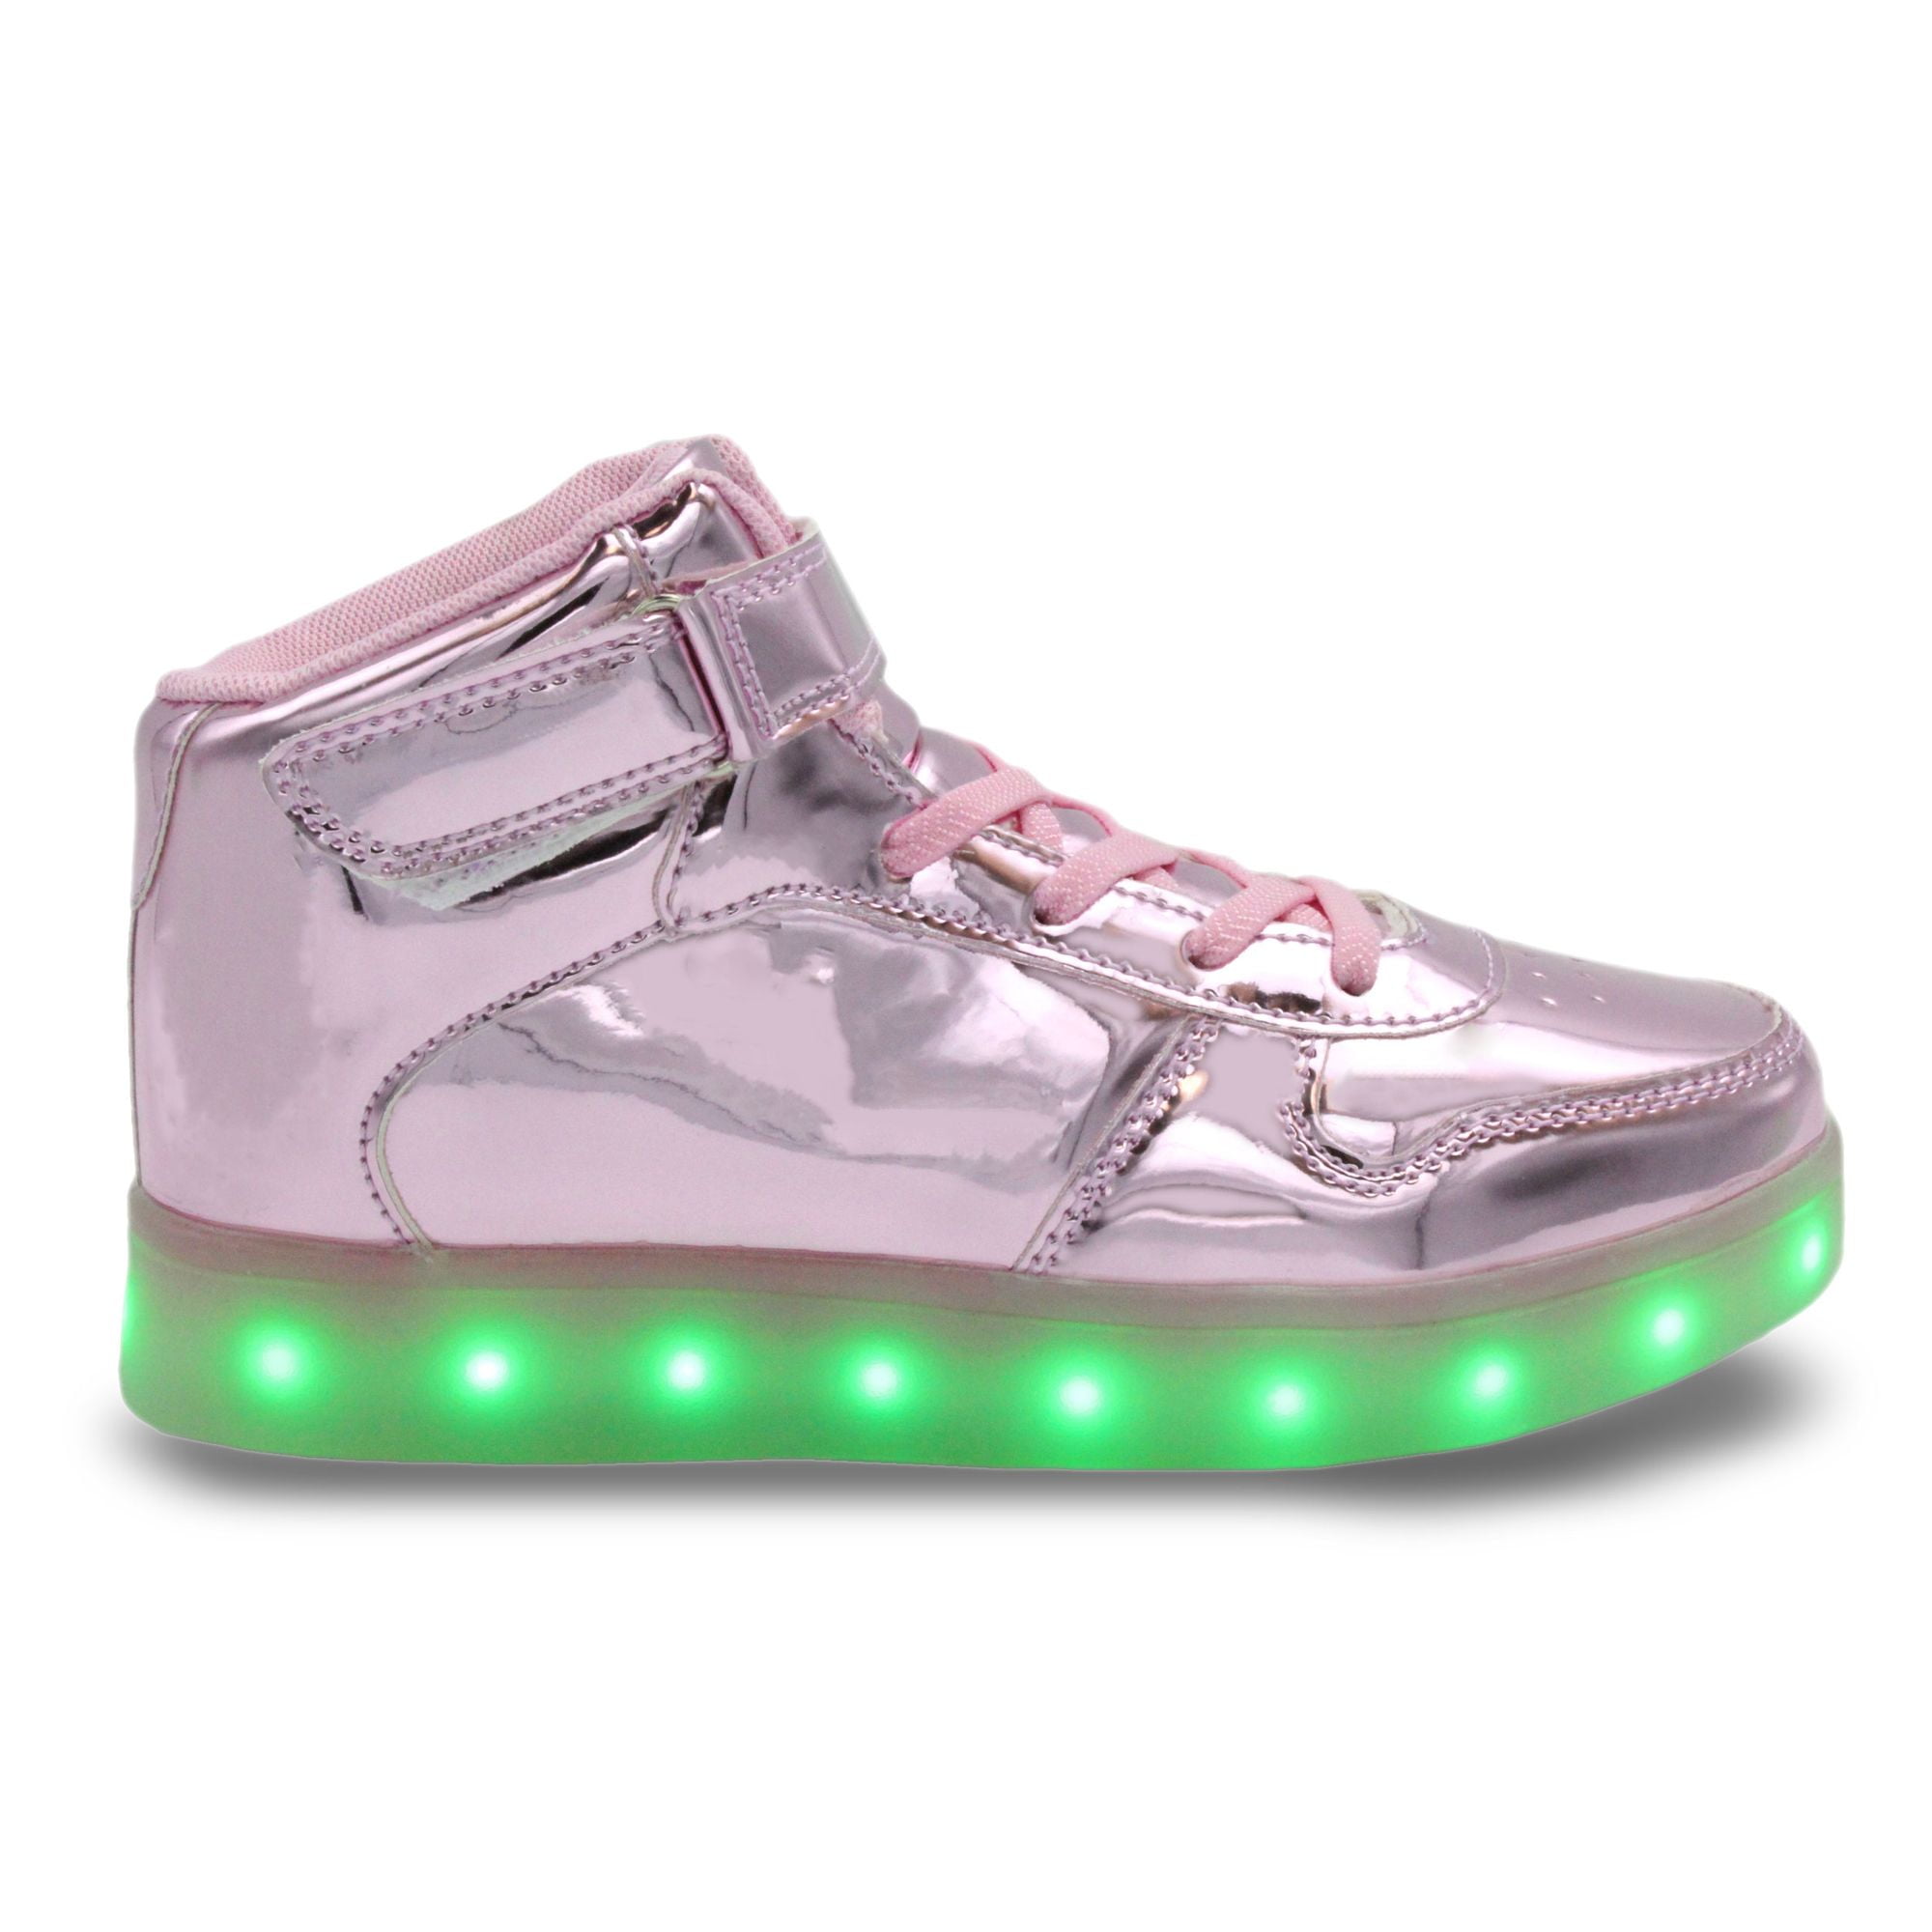 Family Smiles LED Light Up Sneakers Kids High Top Boys Girls Unisex Strap Lace Up Shoes Pink Little Kid US 12 / EU 30 - Walmart.com